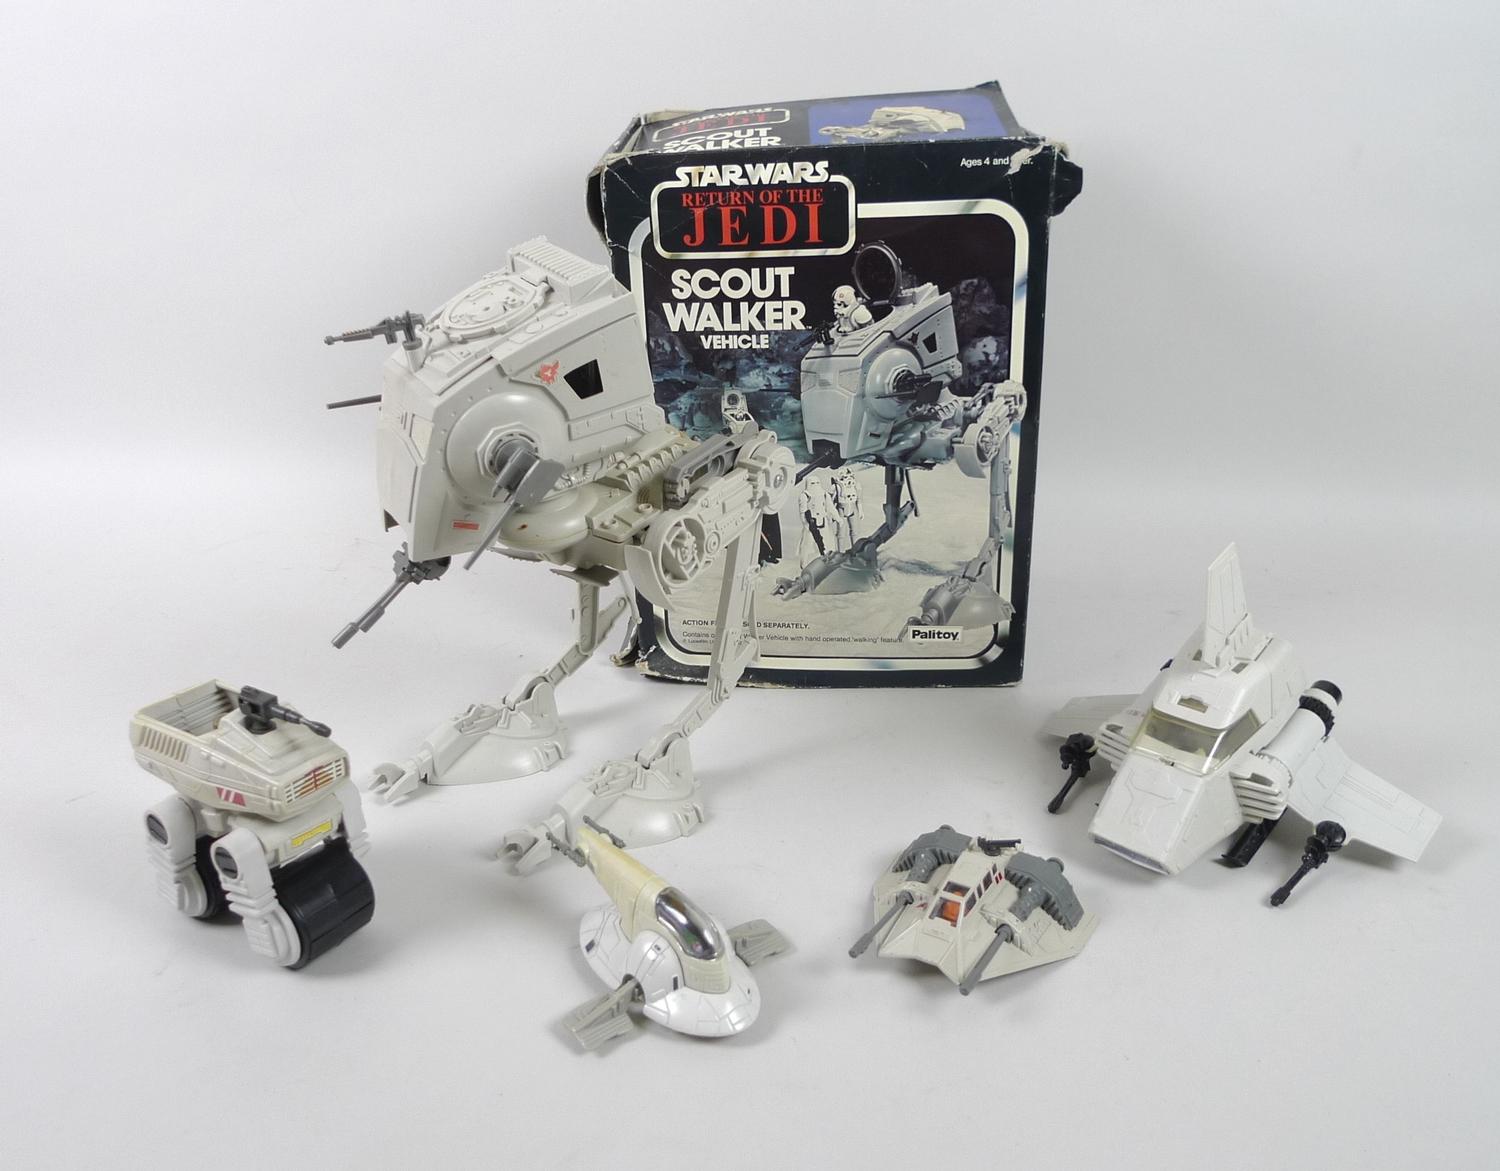 A 1982 Return of the Jedi toy Scout Walker model, with original box, together with toy other Star